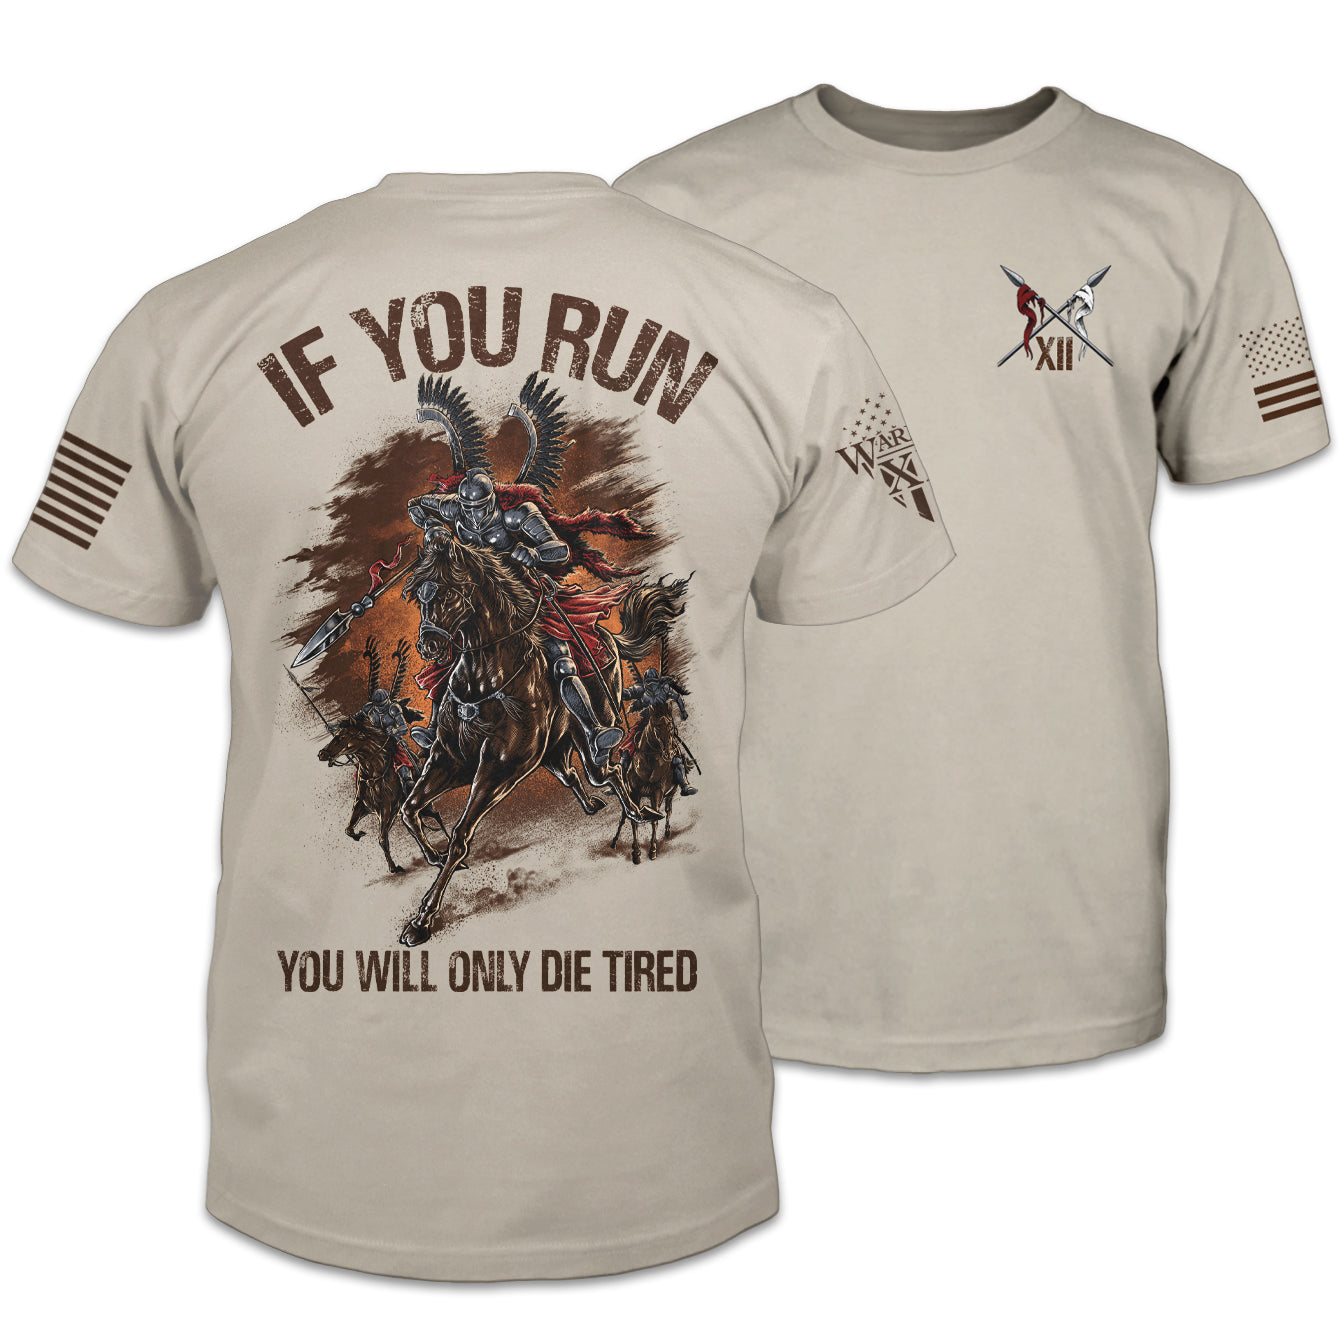 Front & back light tan t-shirt with the words "If you run, you will only die tired" with a winged hussar printed on the shirt.